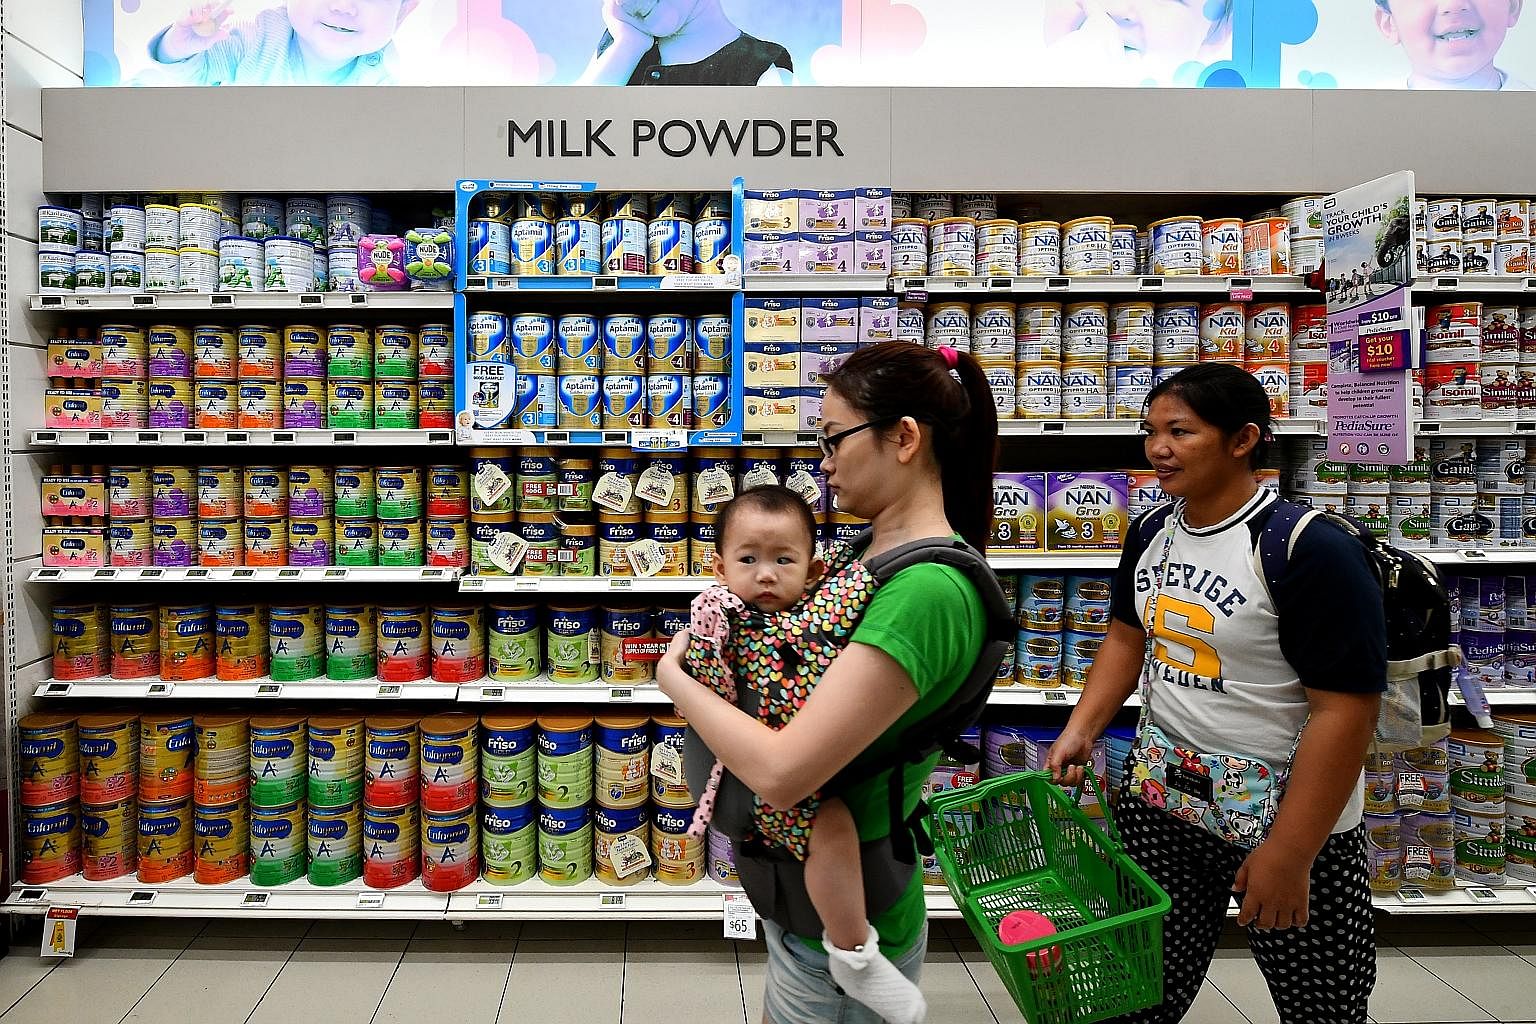 The average price of a 900g tin of infant milk powder went up by 59 cents to $56.65 last year, according to the Consumer Price Index.